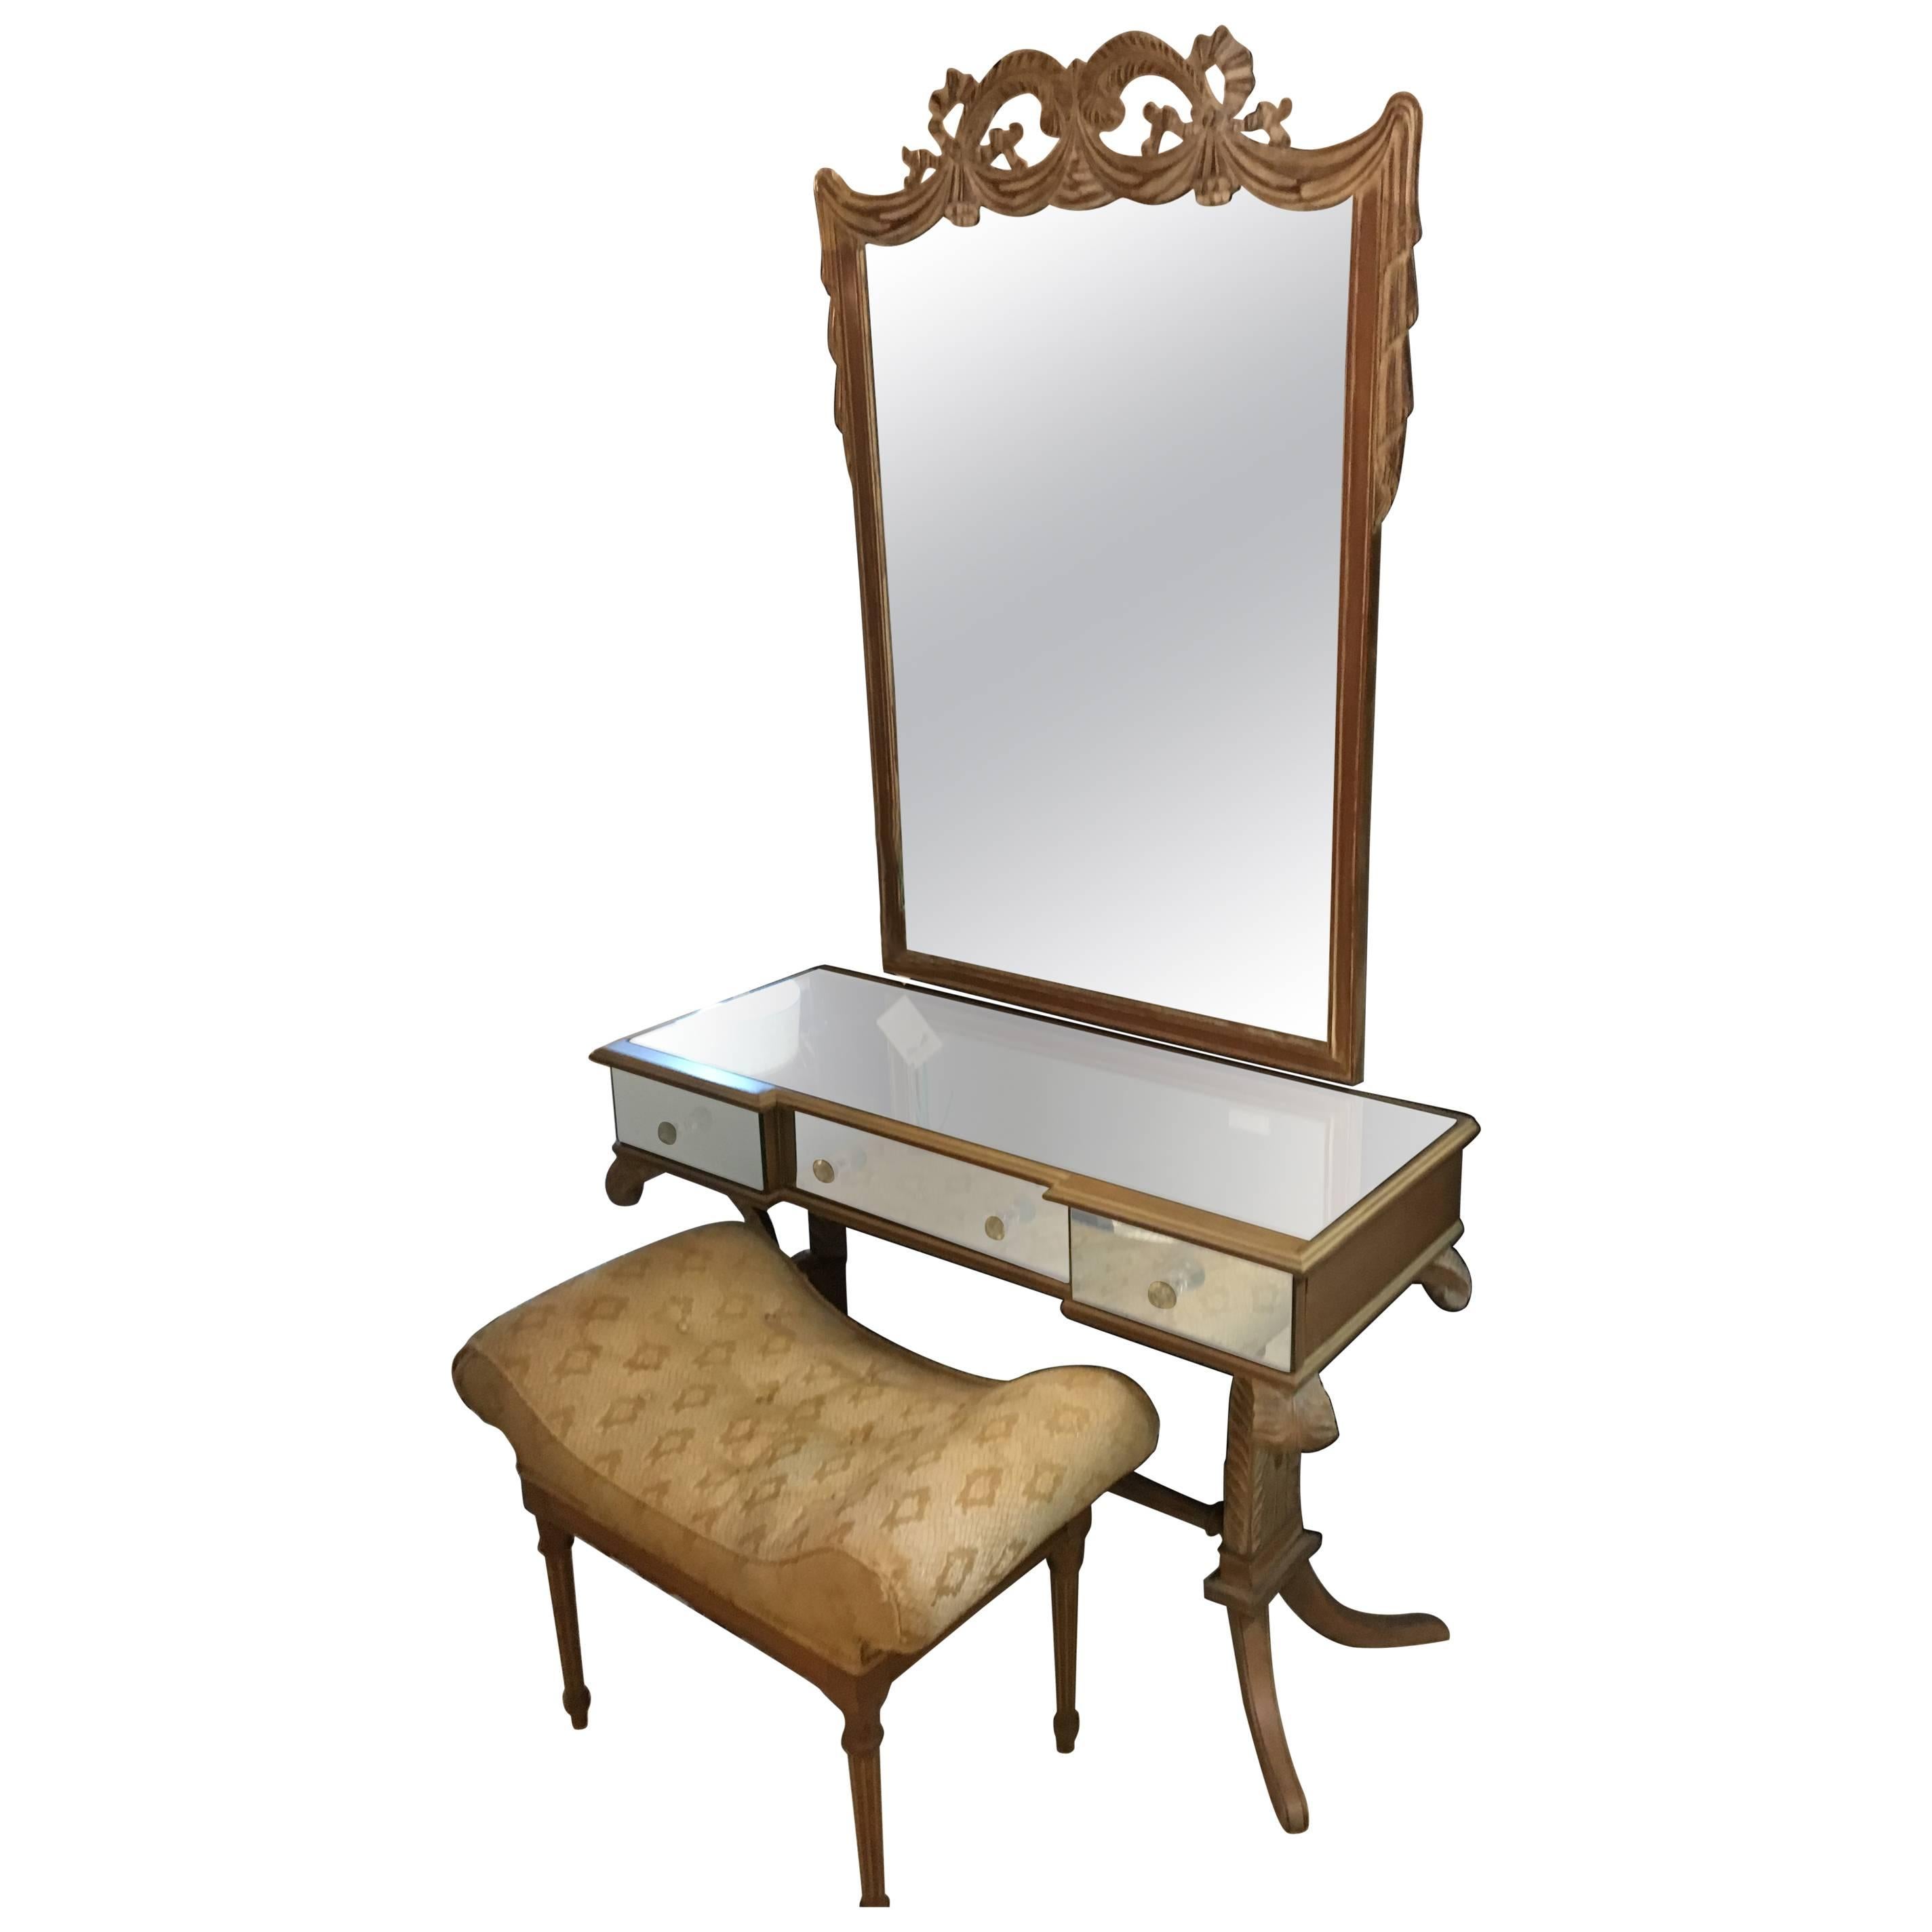 A Grosfeld House Style Drapery Form Mirror and Mirrored Vanity Desk